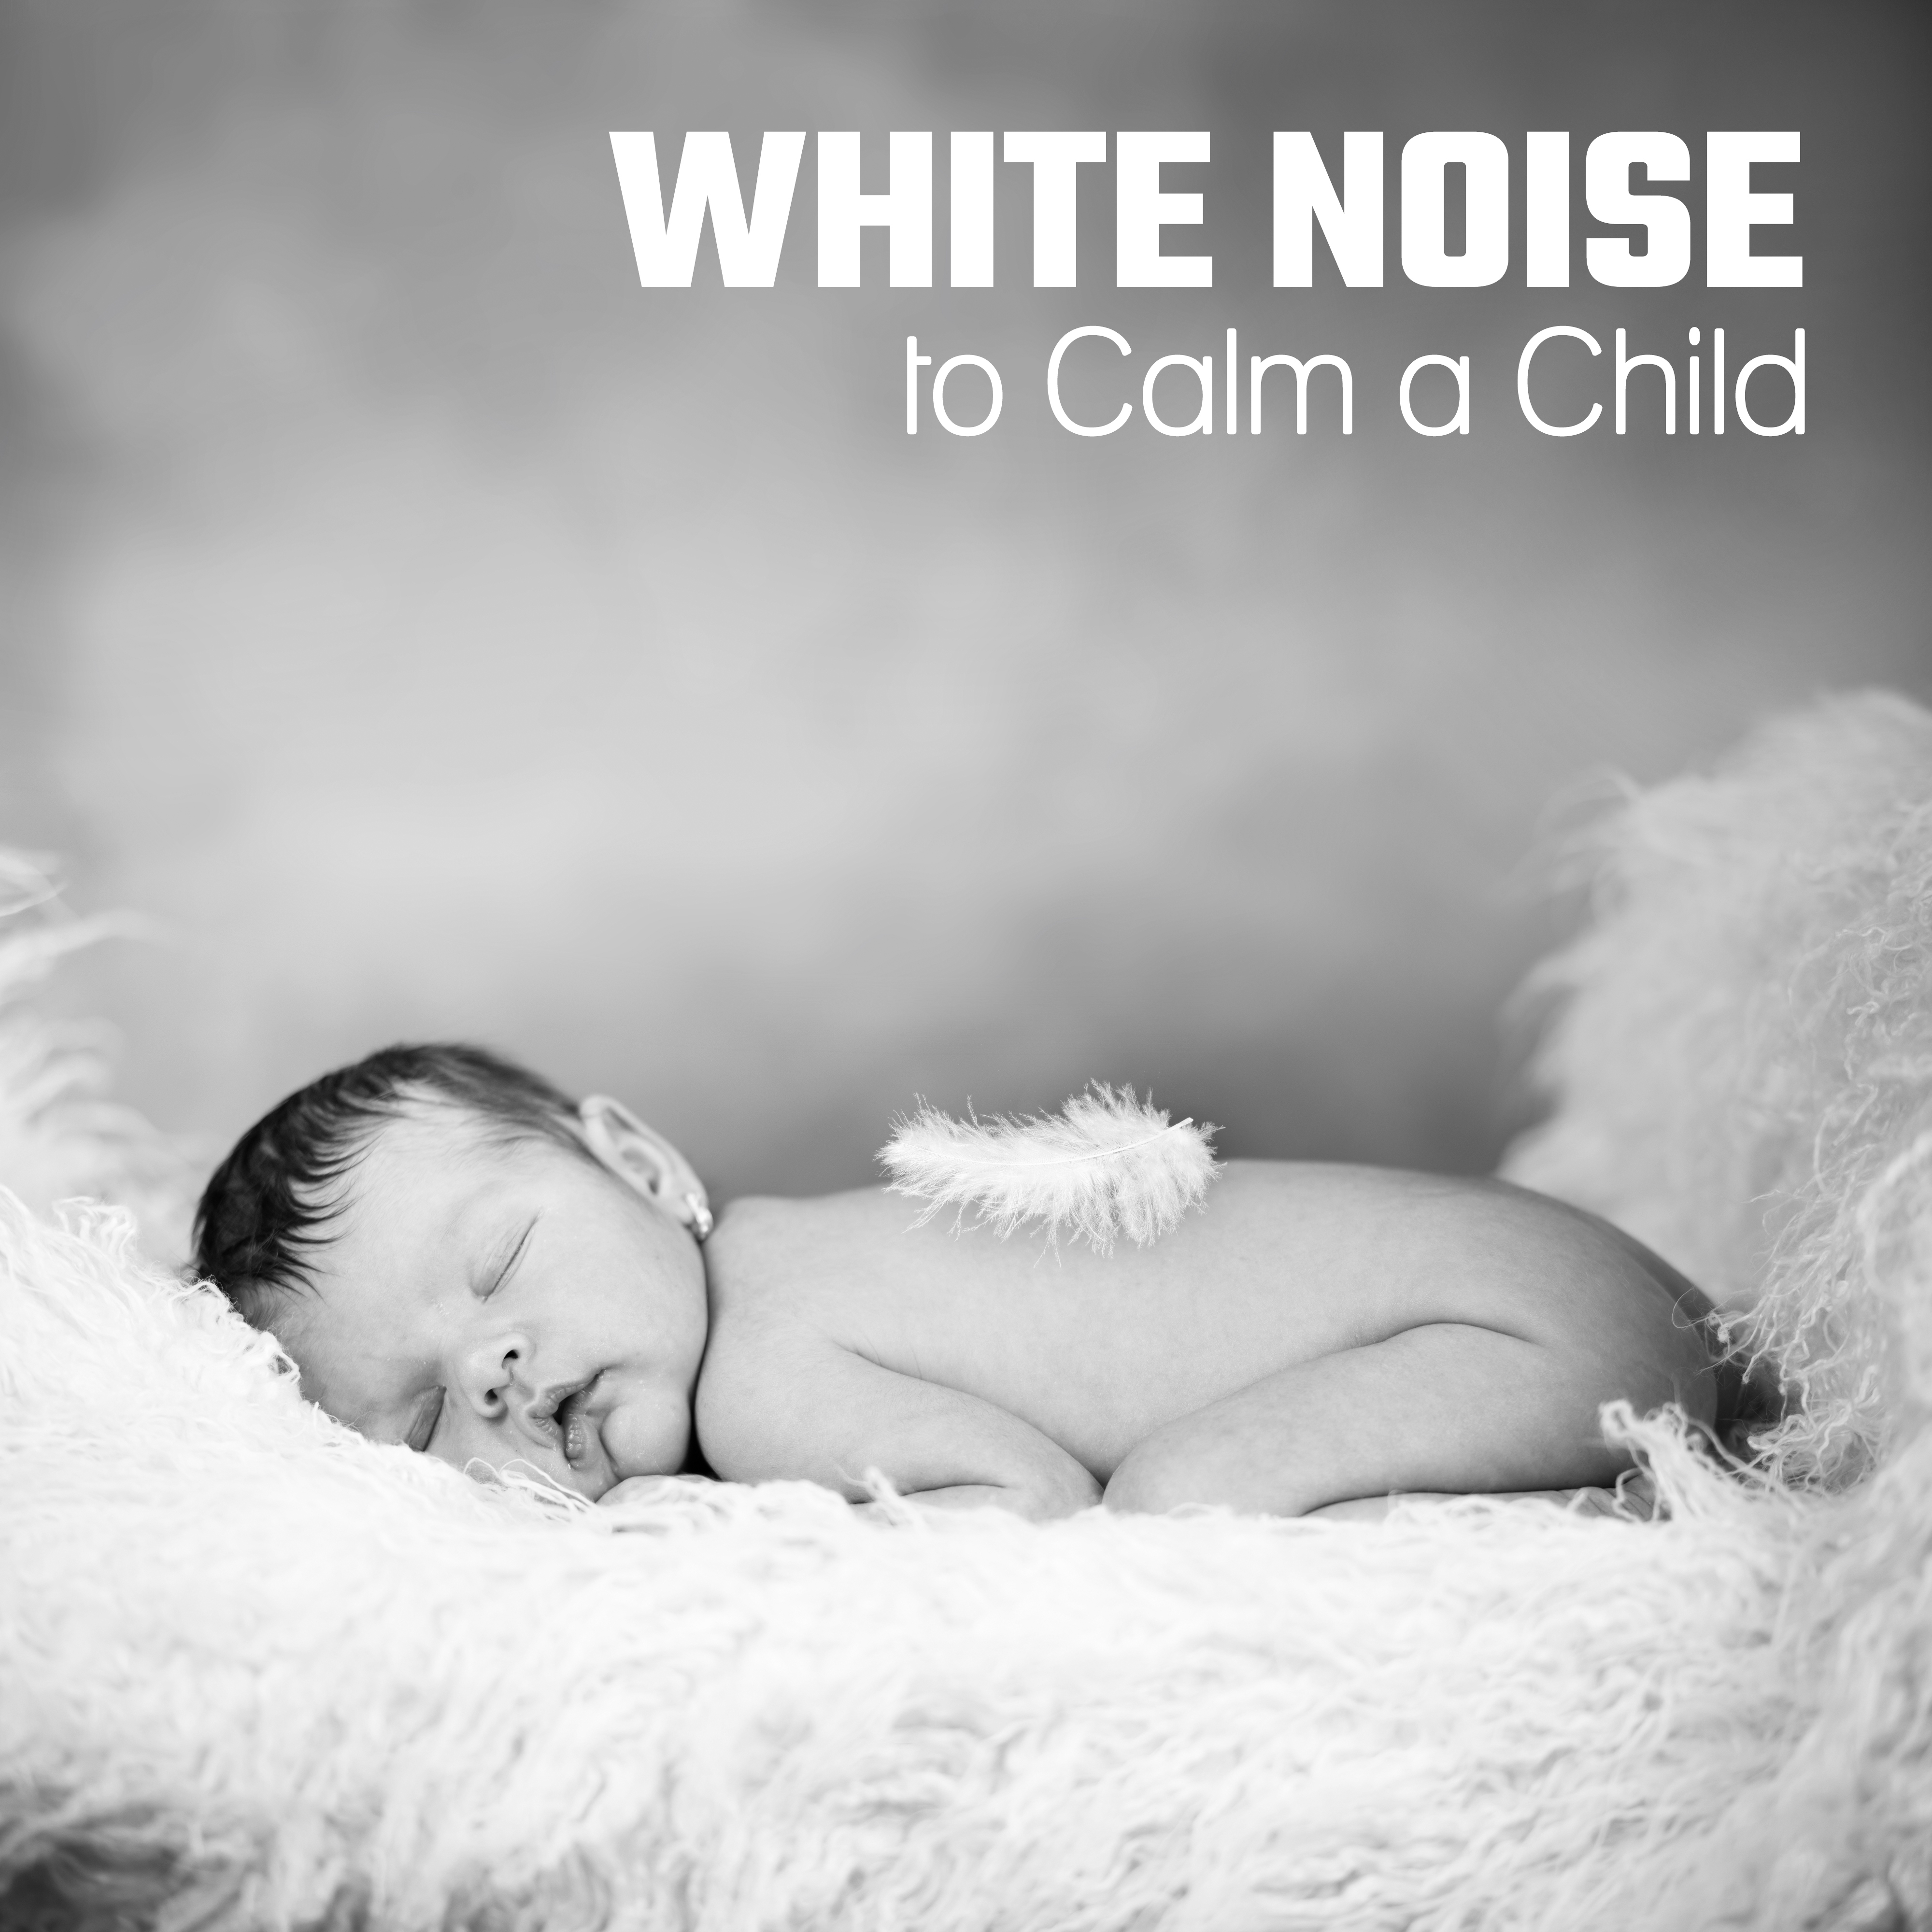 White Noise to Calm a Child  Relaxing Music, Music for Baby to Fall Asleep, Music for Babies, Deep Sleep, Ocean Waves